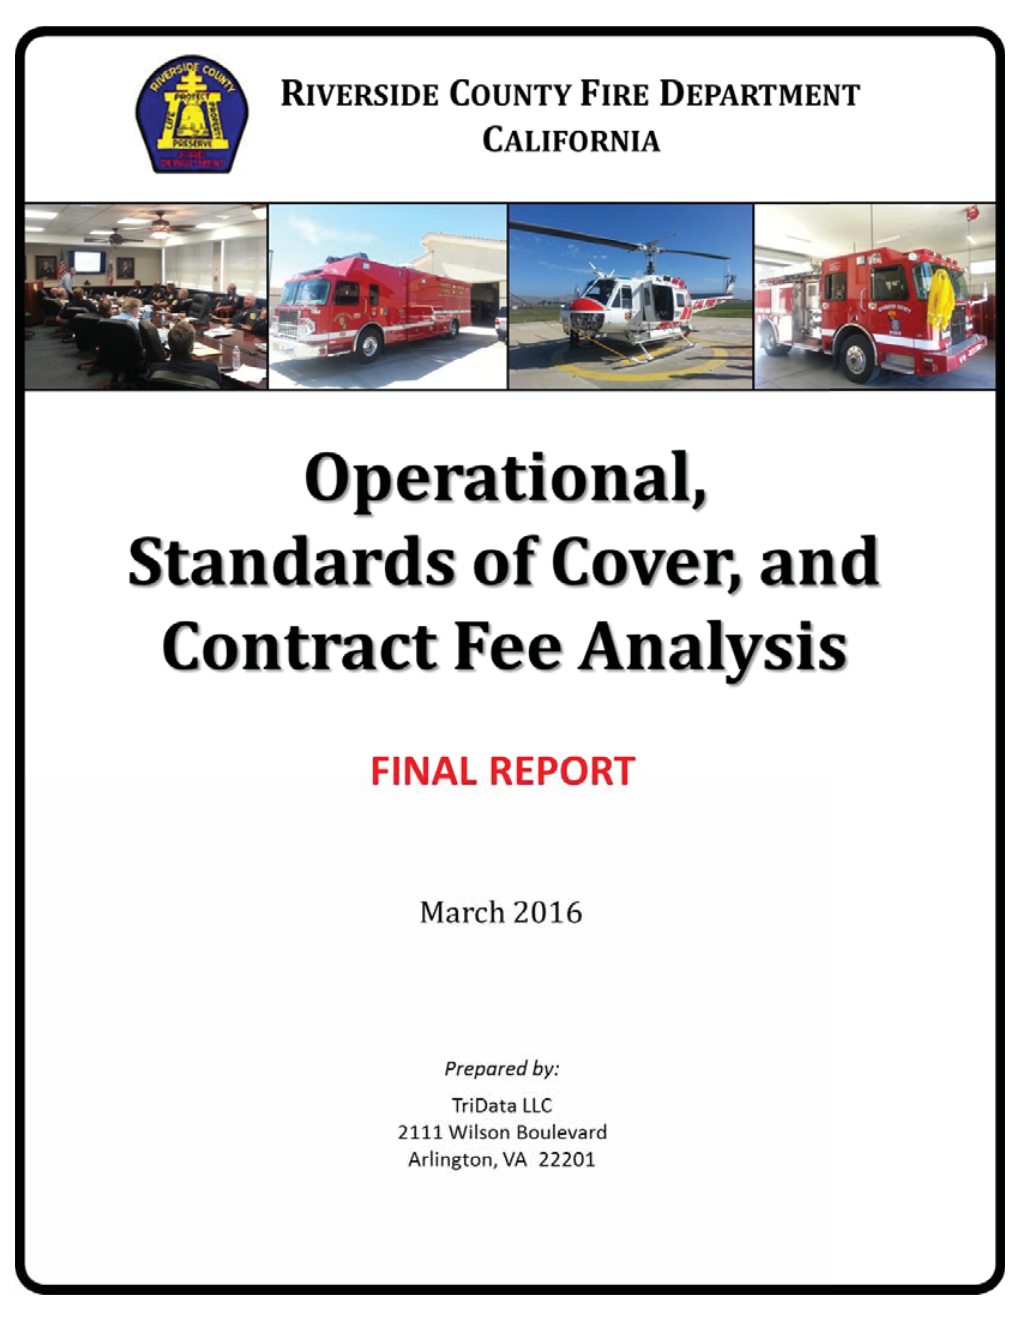 Operational, Standards of Cover, and Contract Fee Analysis